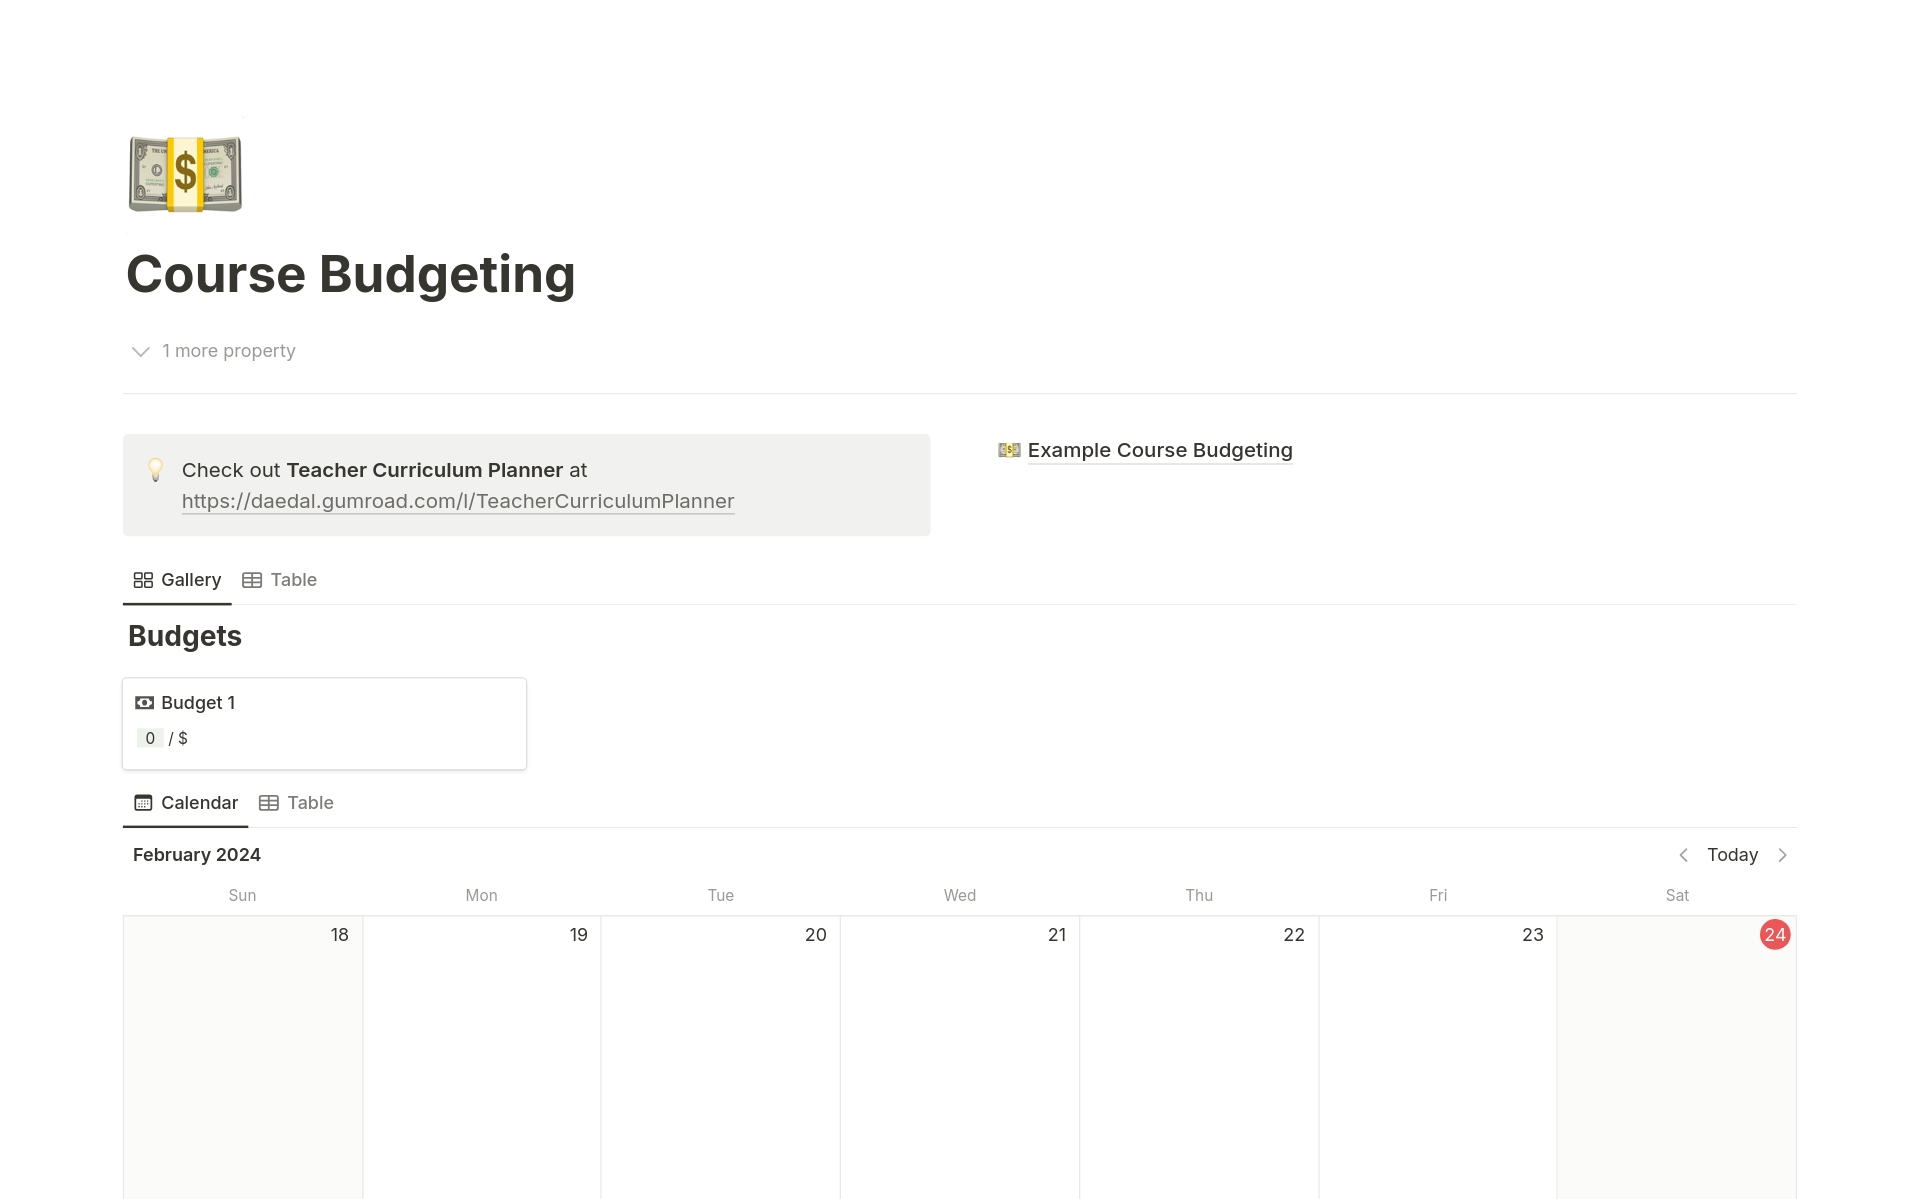 Budgeting is never an easy task. This template will have 2 main databases to keep track of your expenses with a set budget. It will also provide reminders to purchase/renew supplies and a summary of what you have spent so far.